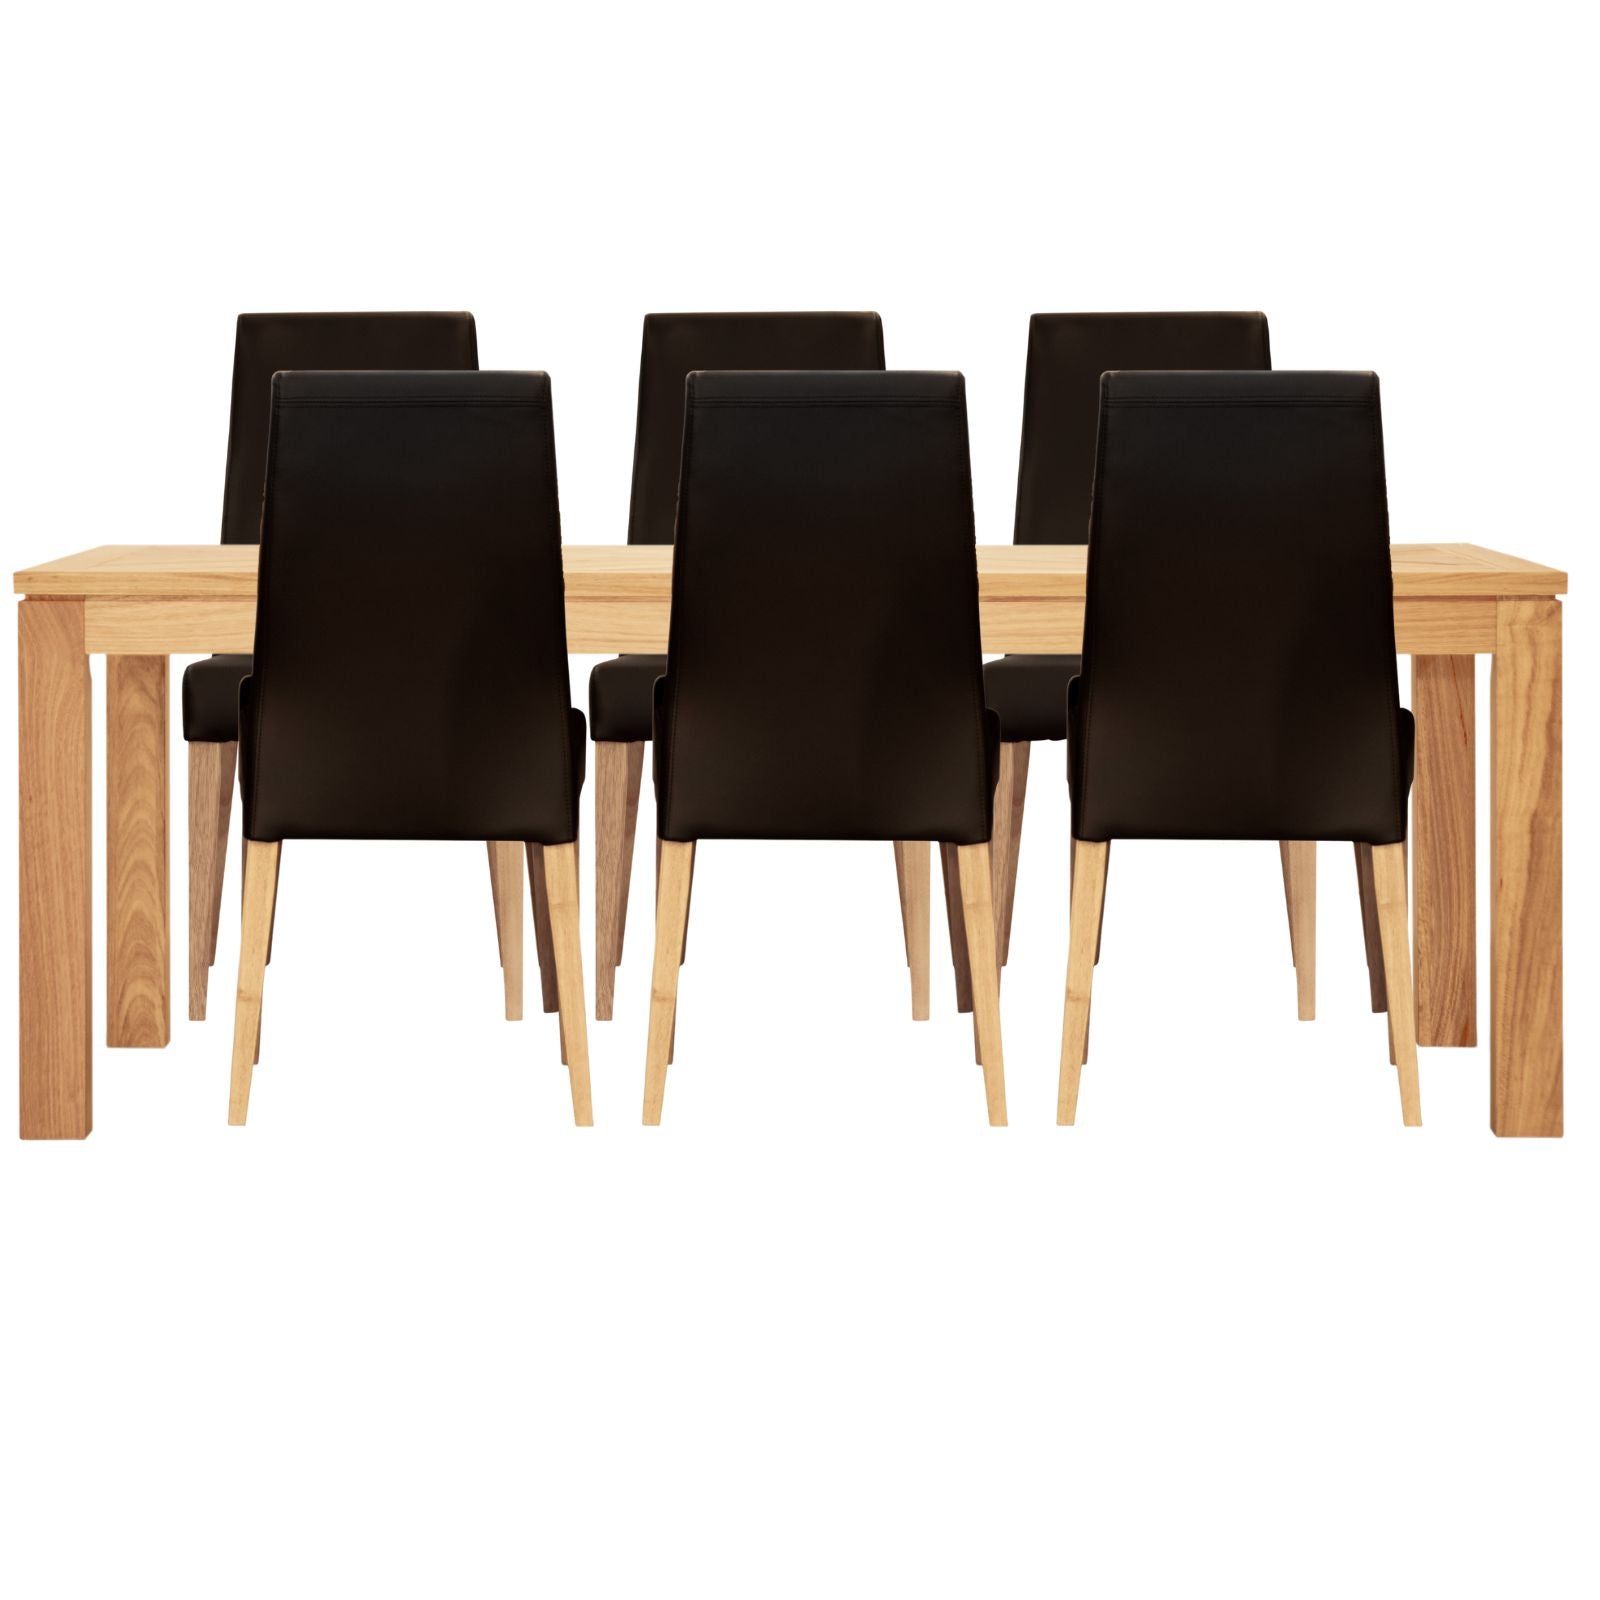 Rosemallow 7pc Dining Set 180cm Table 6 Black PU Chair Solid Messmate Timber - SILBERSHELL